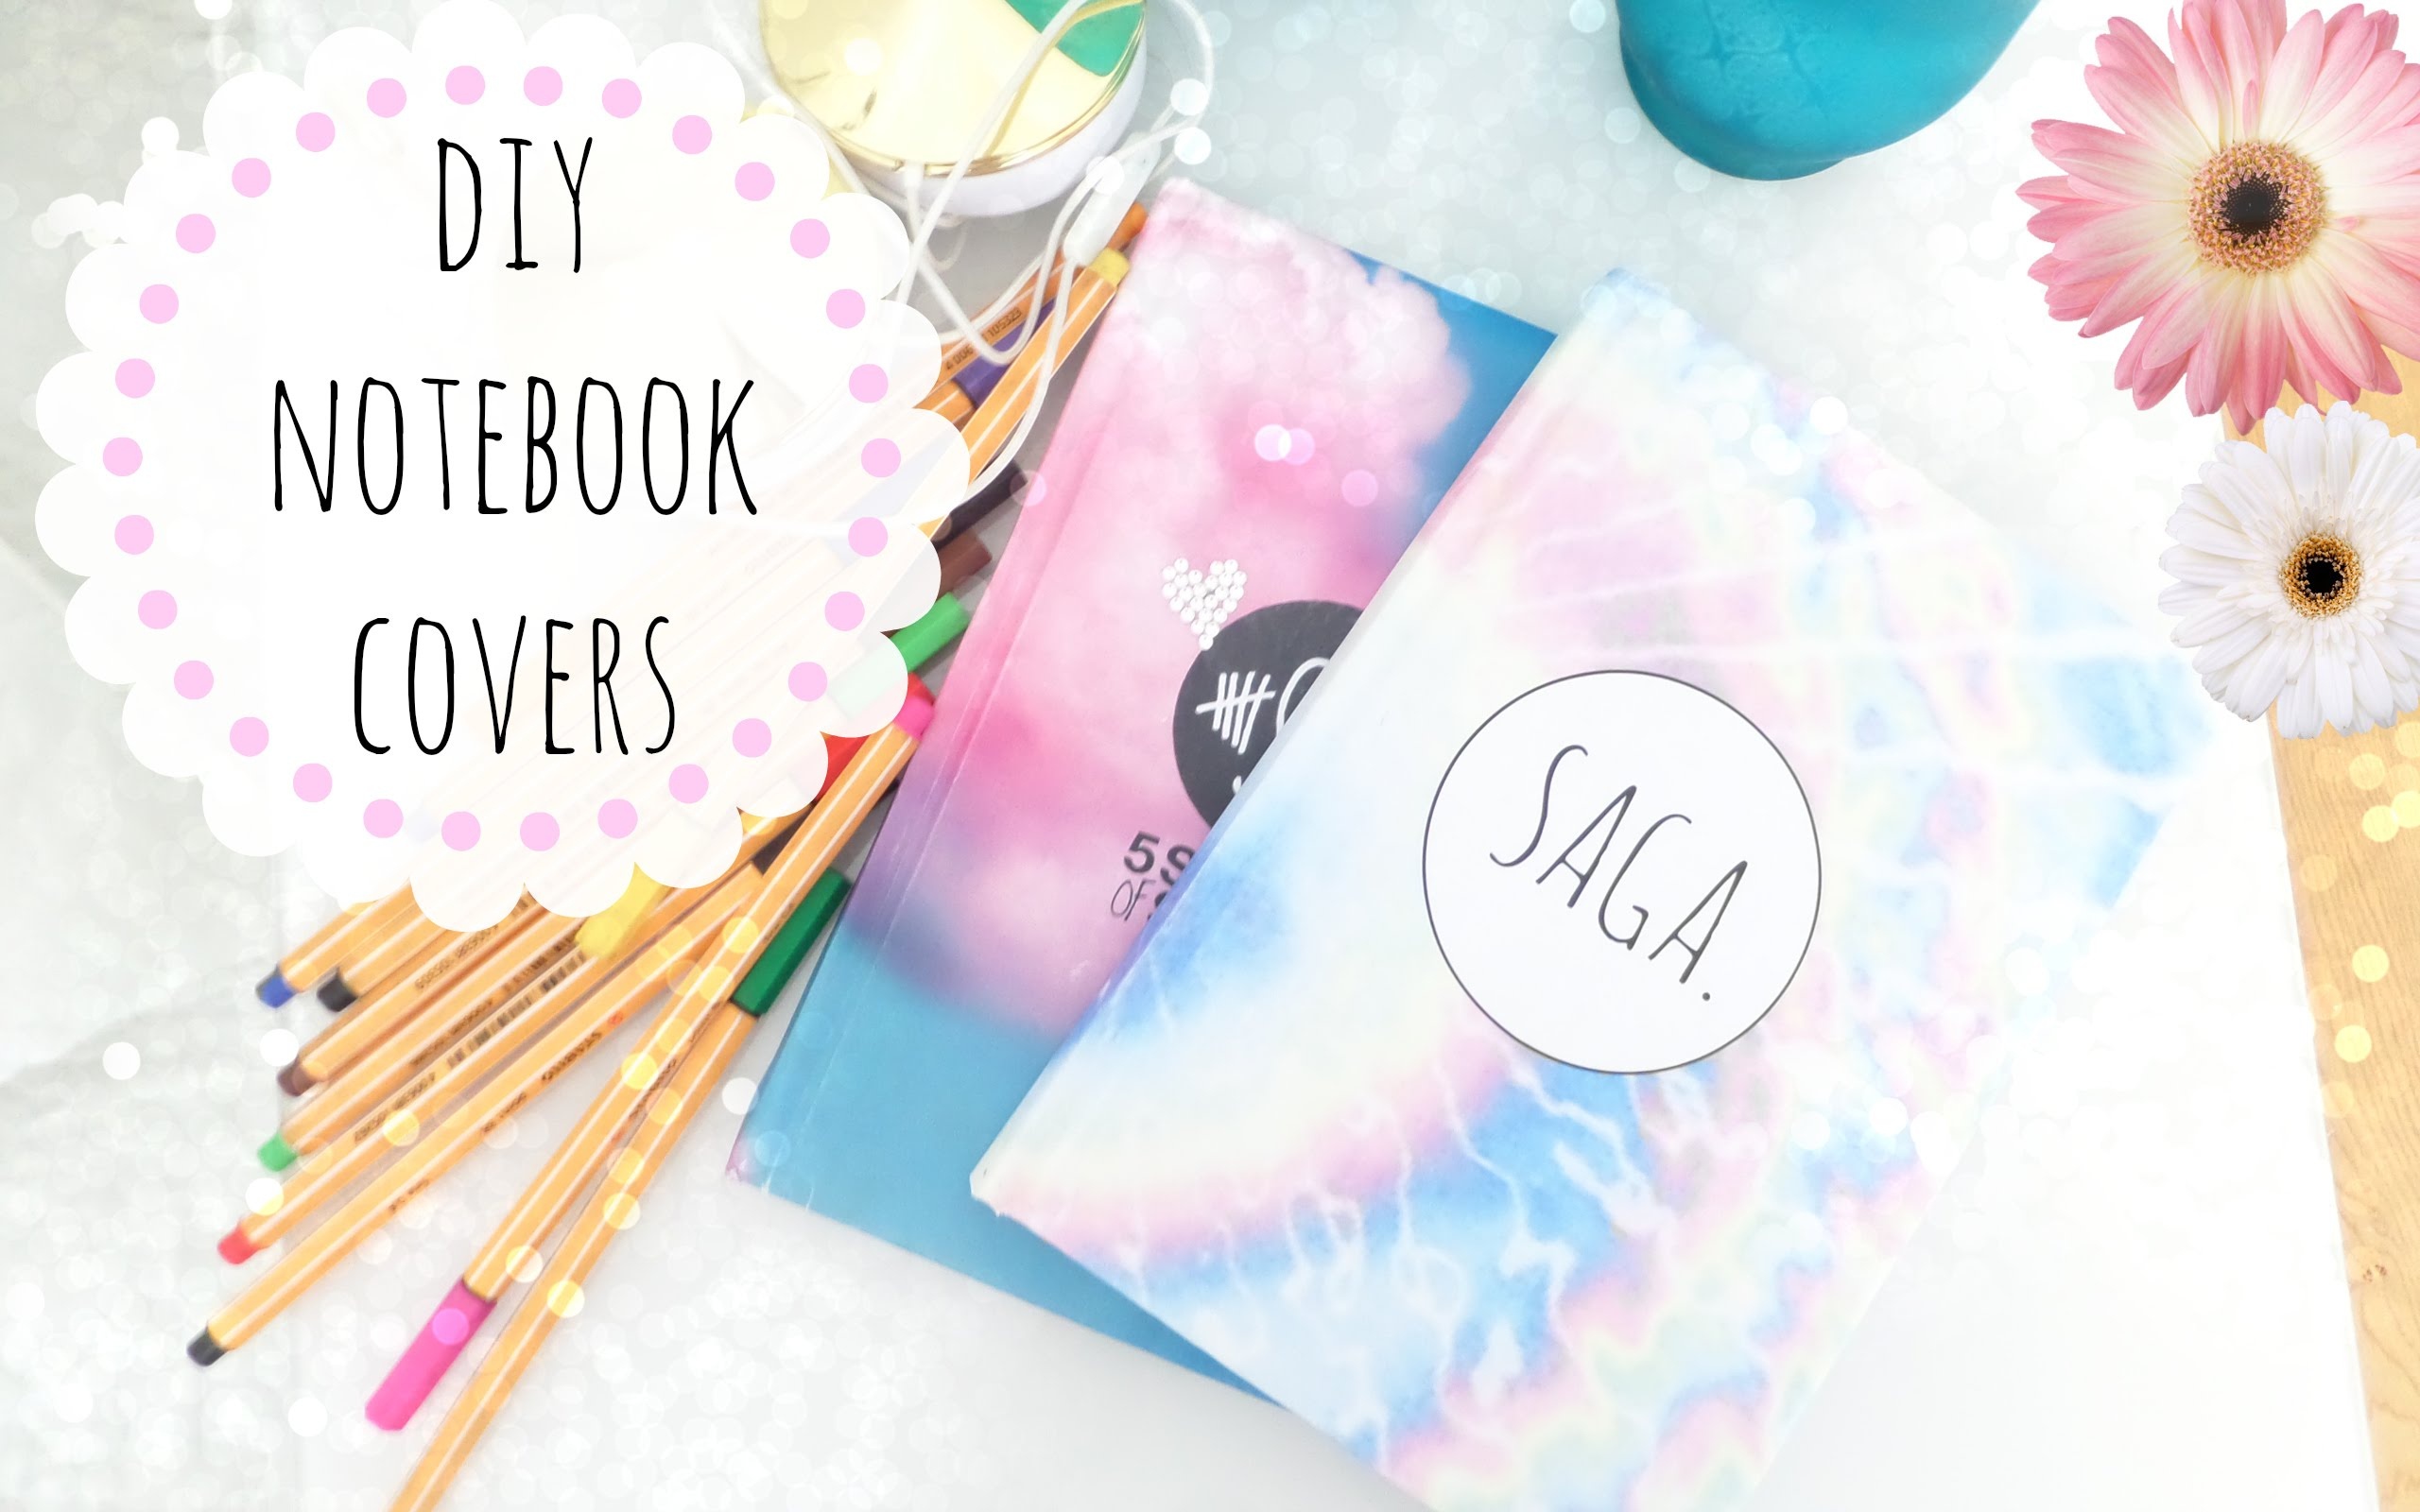 15 Customizable Diy Notebook Covers (Part 2) - Style Motivation - Free Printable Watercolor Notebook Covers